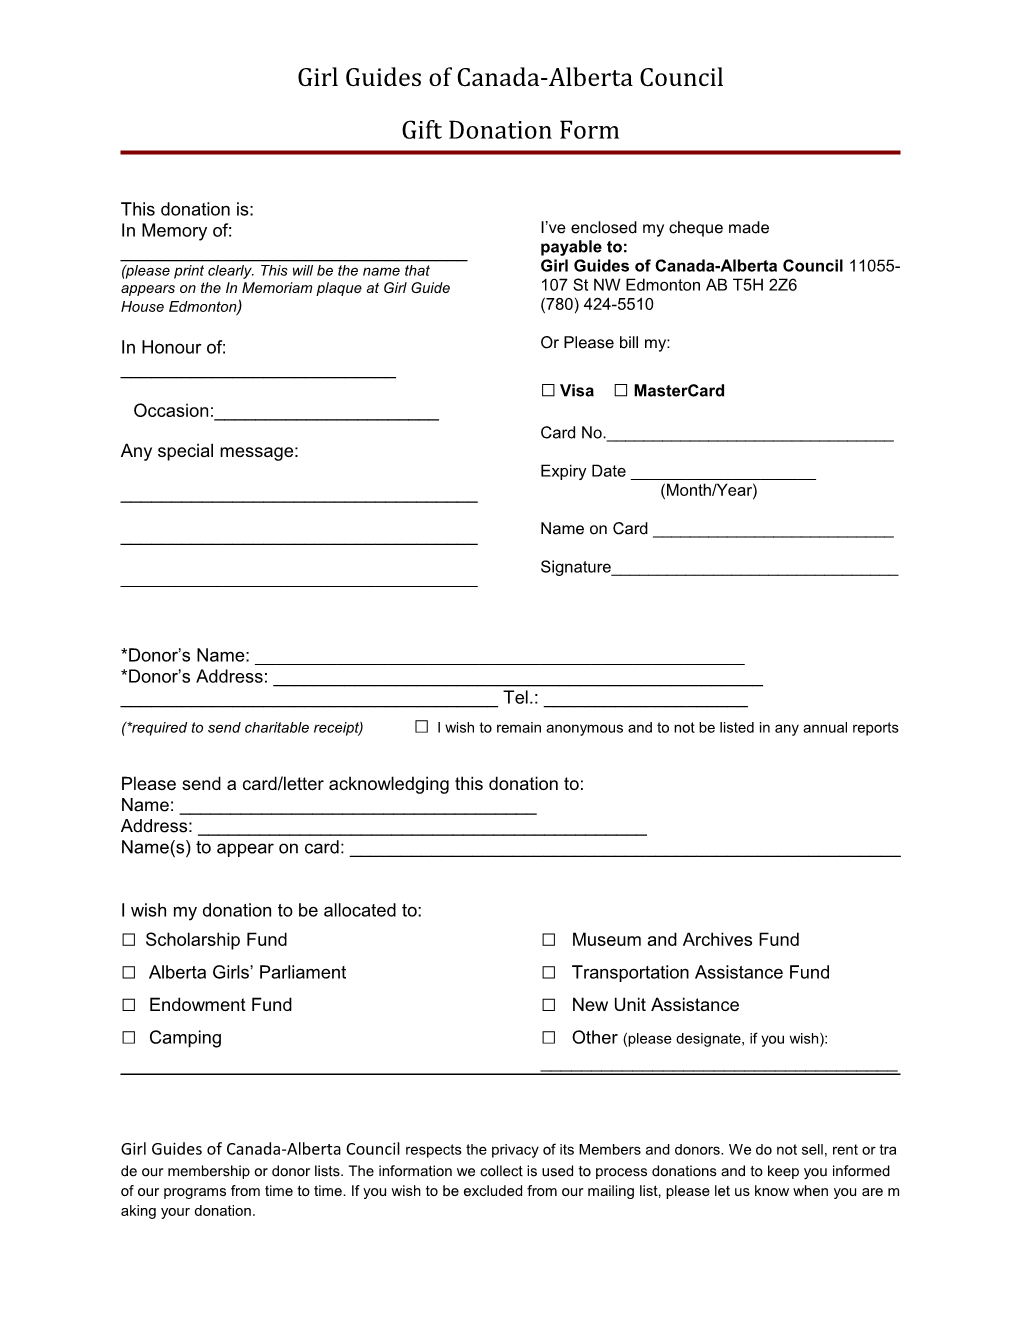 Girl Guides of Canada-Alberta Council Gift Donation Form